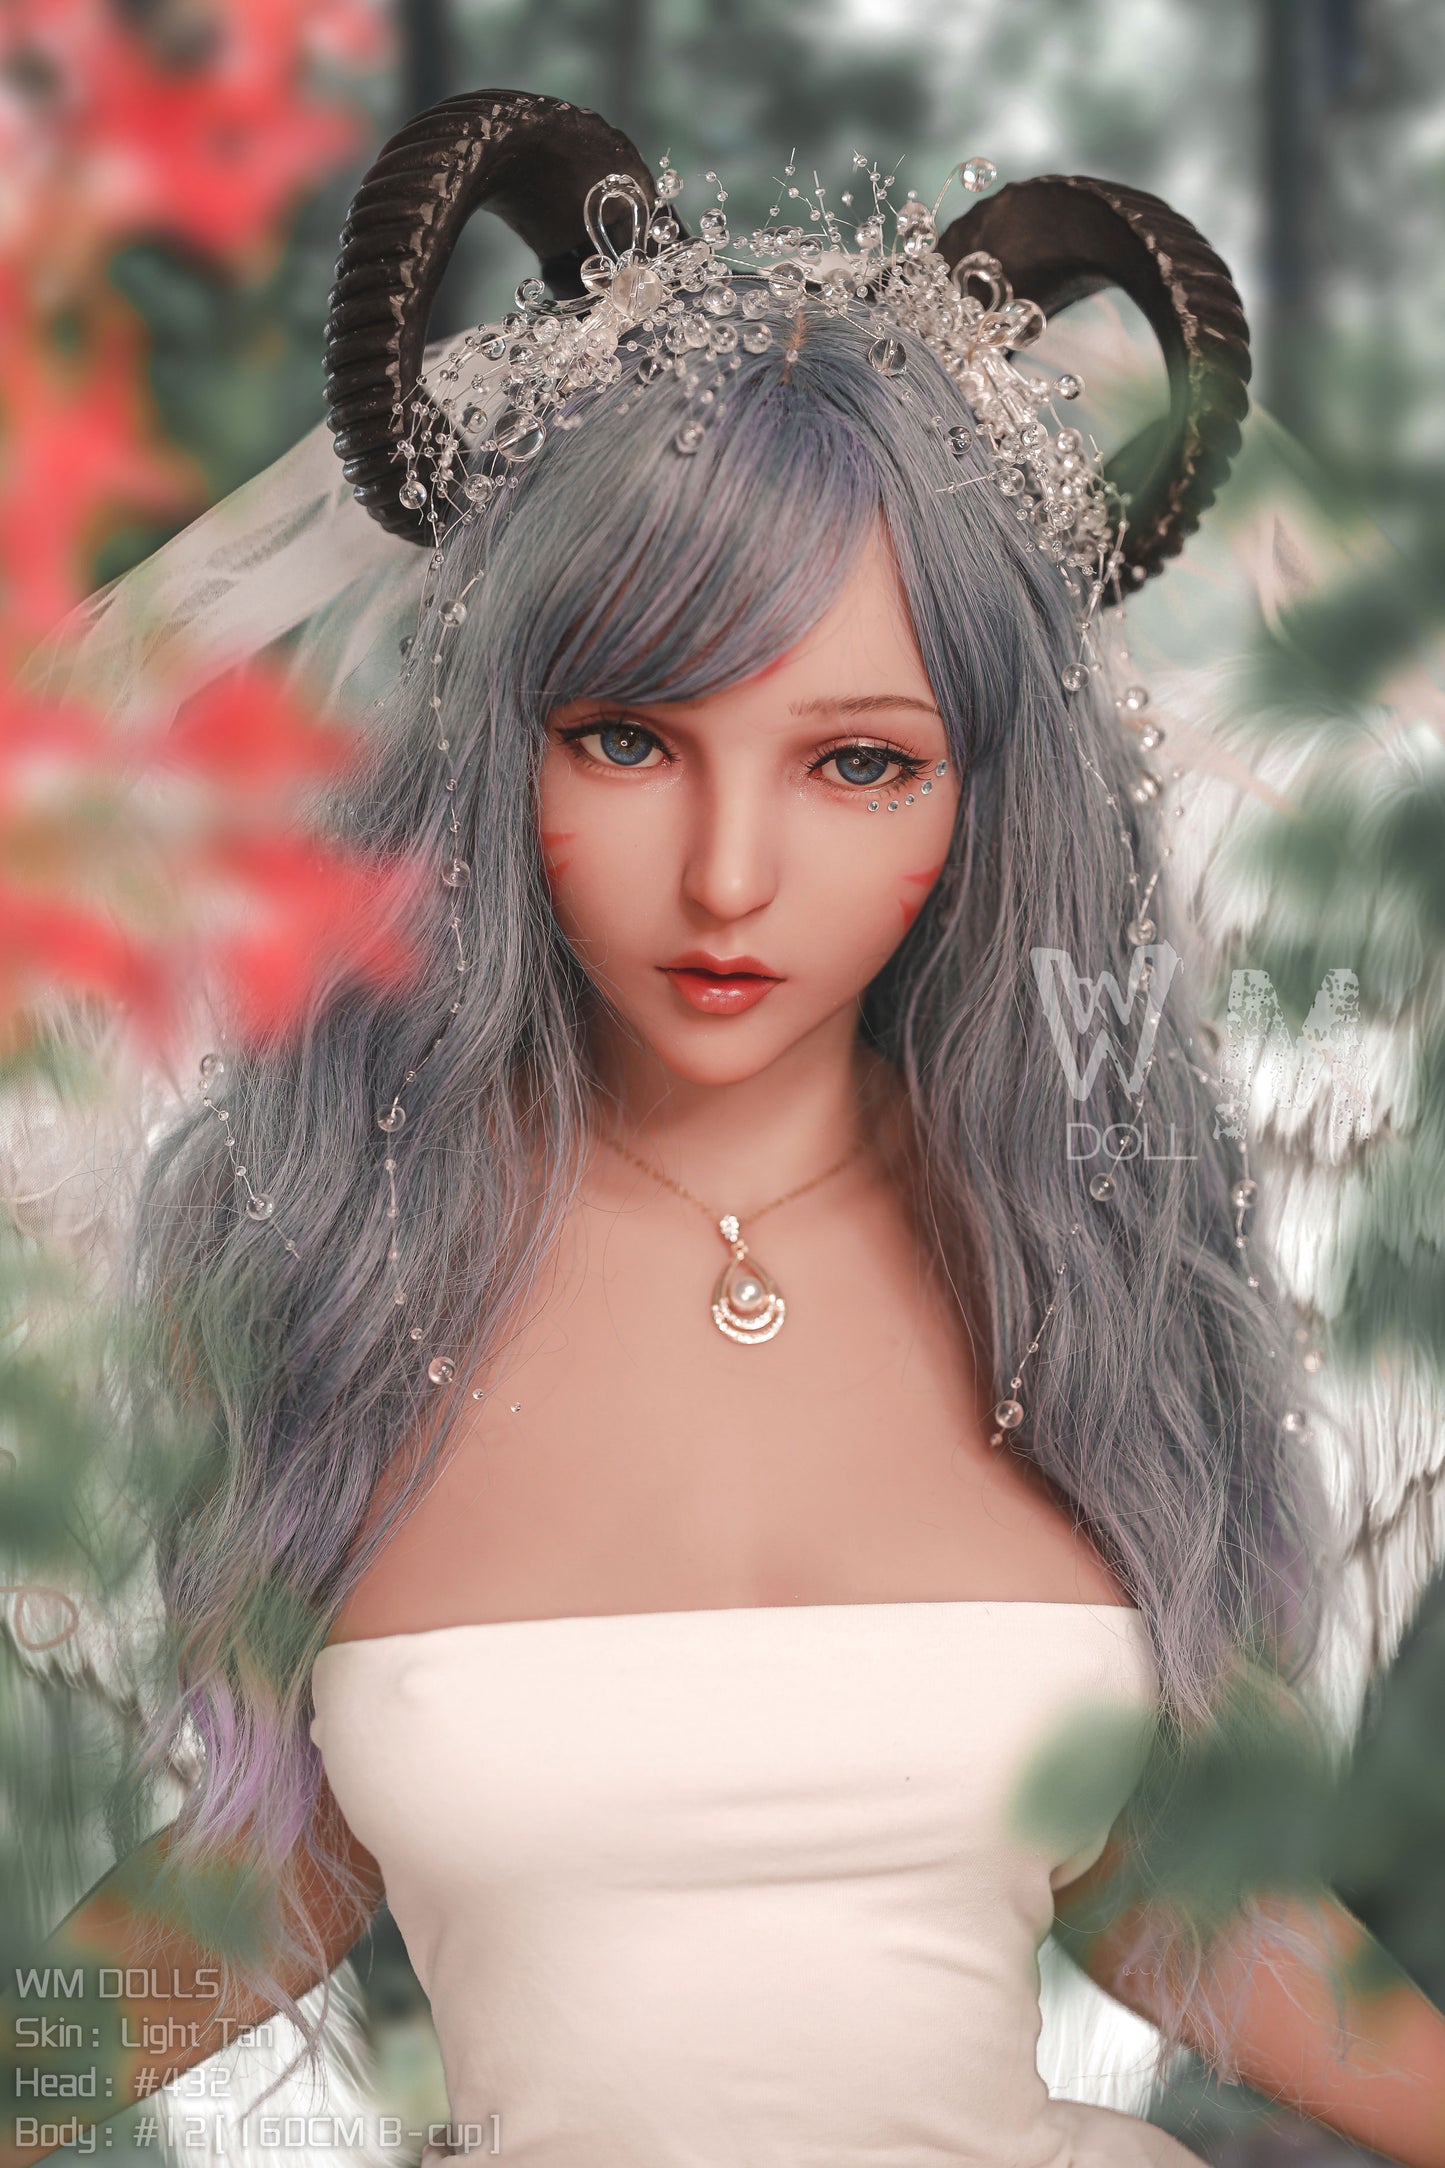 Alisan: WM Sex Doll, Teenage Gray-Haired Angel with Wings, Head No.432